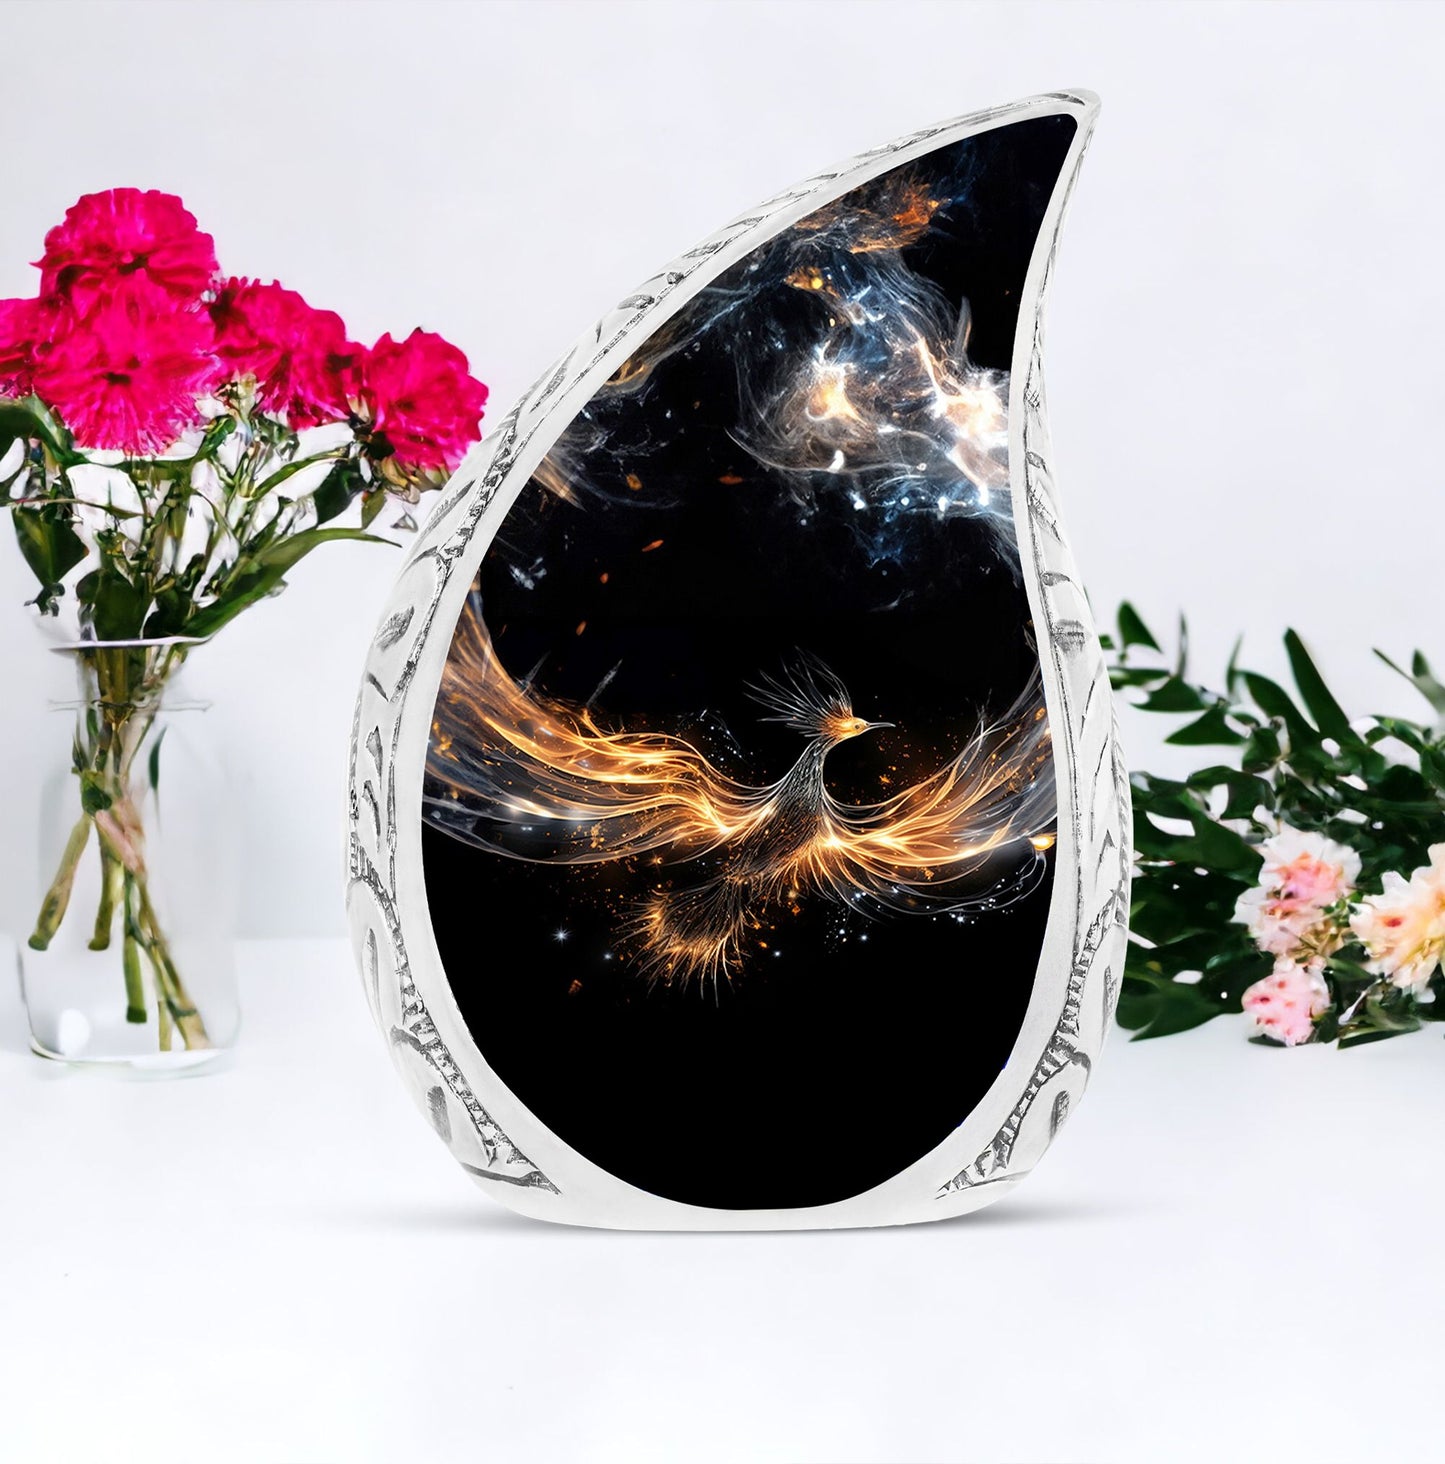 Large, decorative urn styled as a shining phoenix spreading its wings, ideal for human ashes